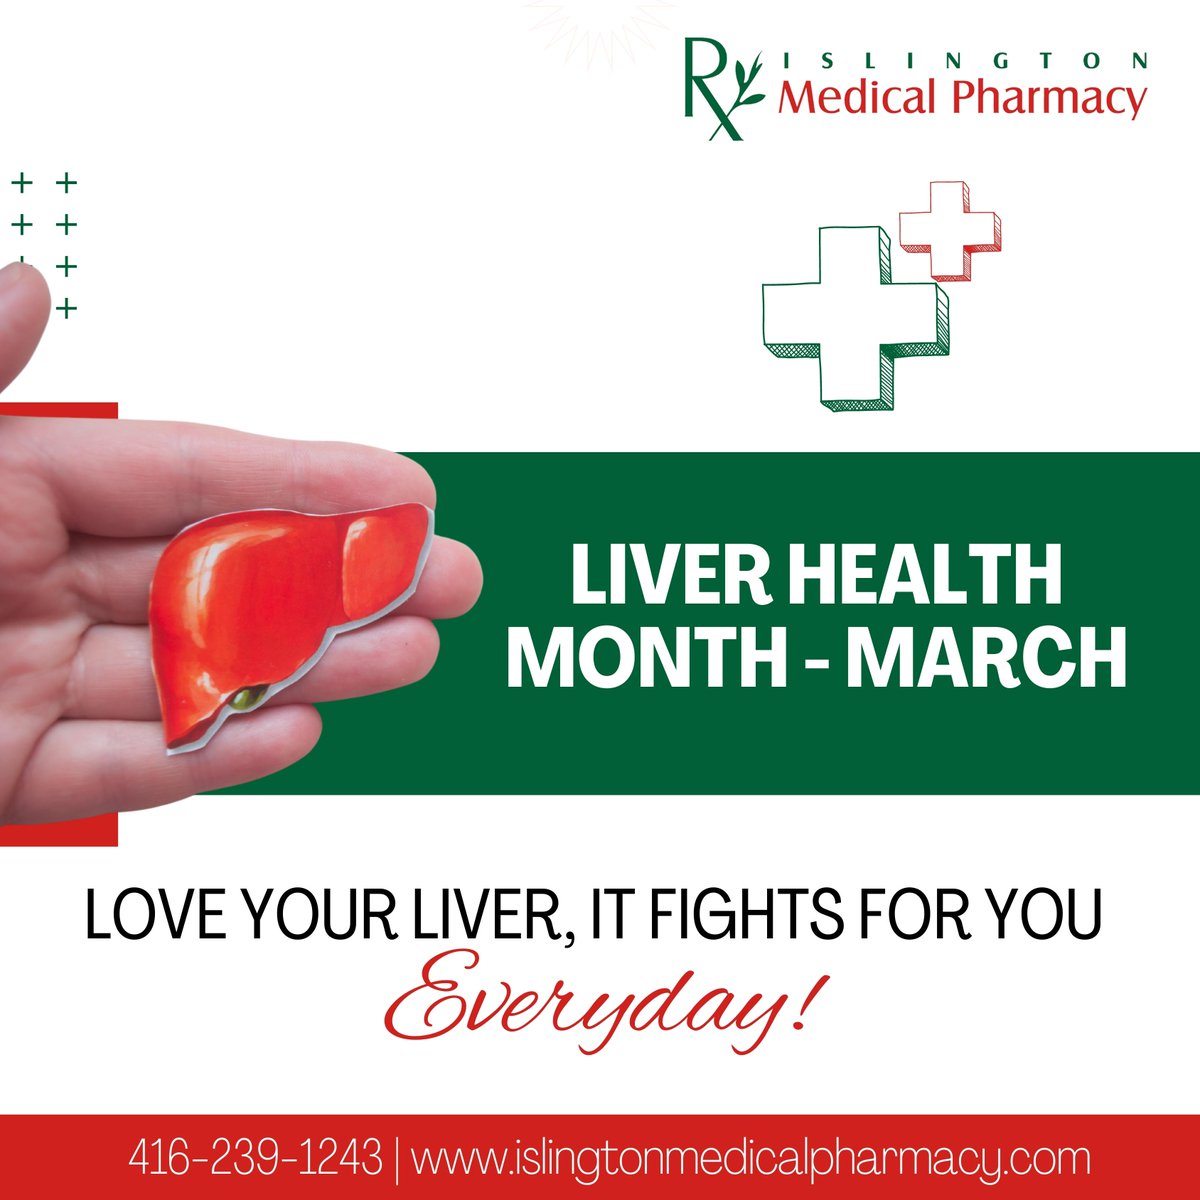 'Did you know that liver #disease is the 5th leading cause of death in adults over 
the age of 65? Take care of yours with these simple tips: 
- Maintain a healthy weight - Eat a balanced diet - #Exercise regularly - Avoid alcohol or drink in moderation '
#livermonth #marchmonth